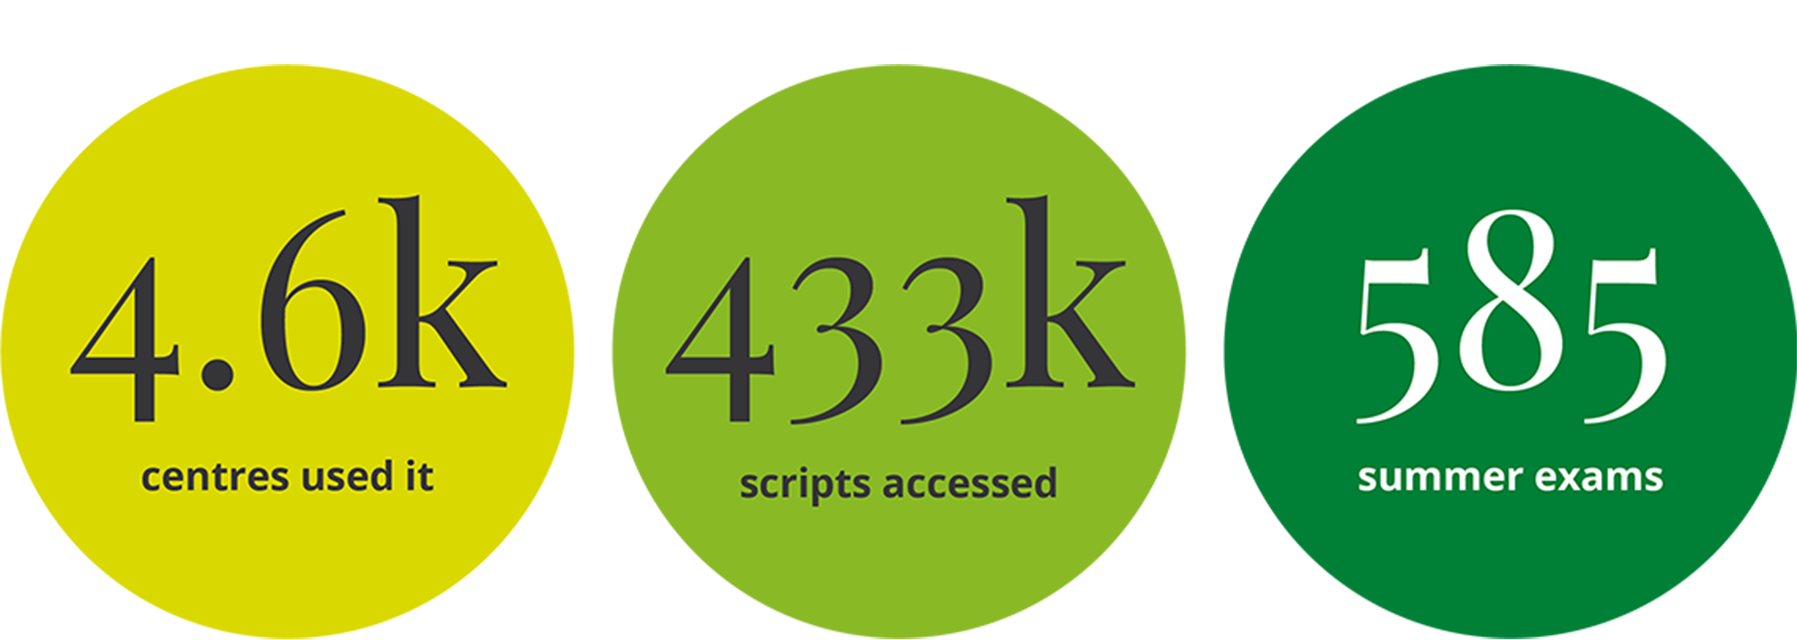 Access to scripts in numbers summer 2018